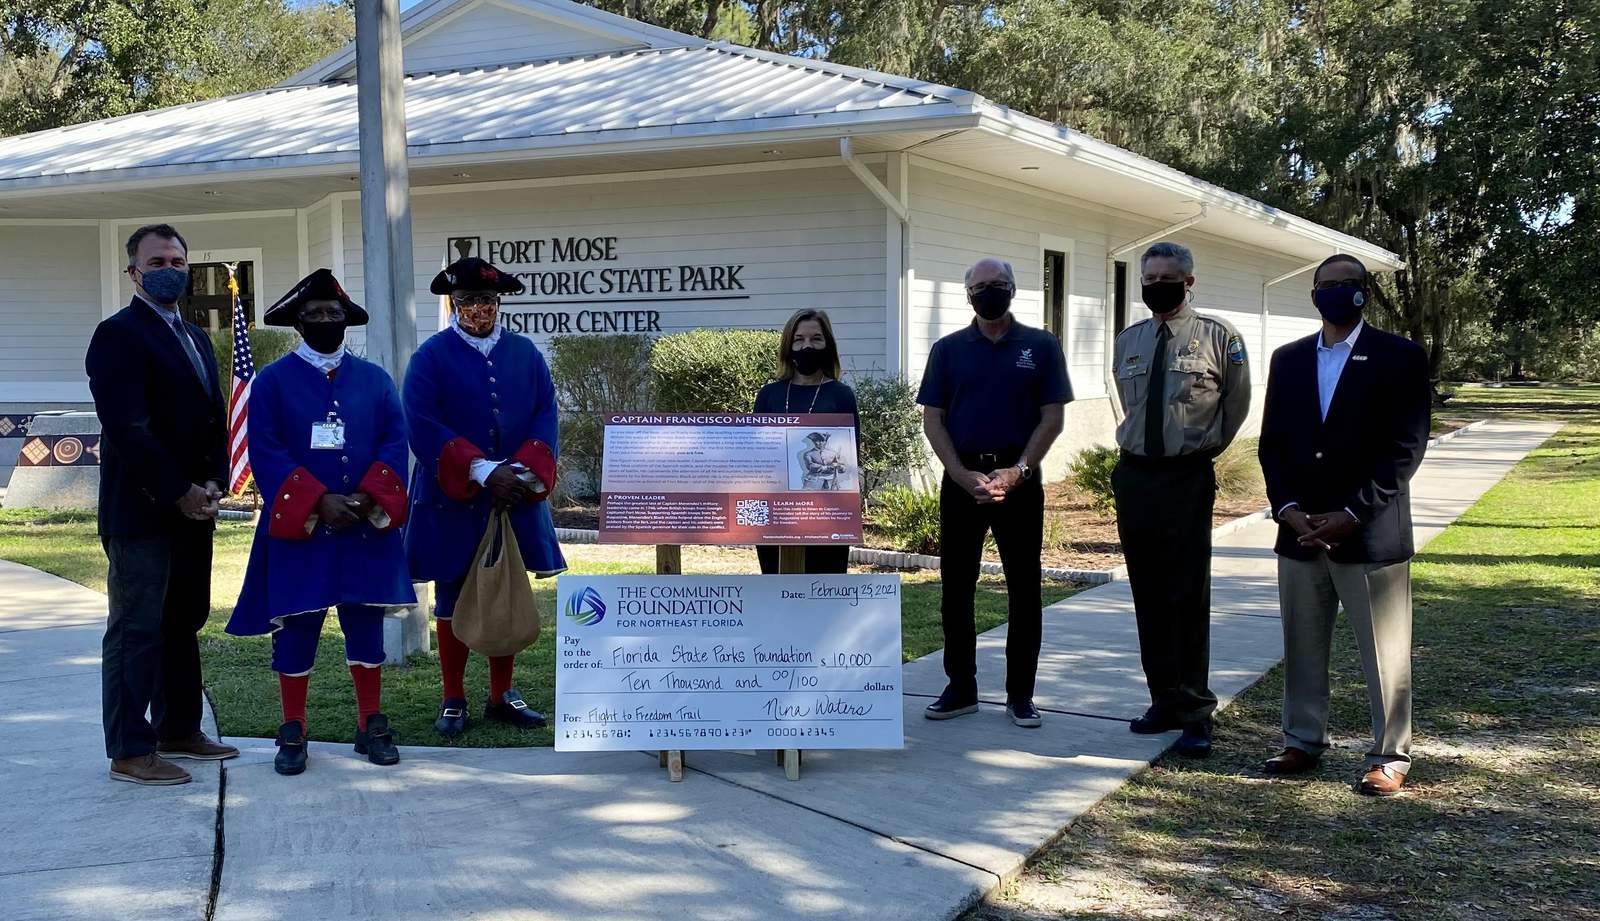 New interactive educational signs bring Flight to Freedom Trail to life year round at Fort Mose